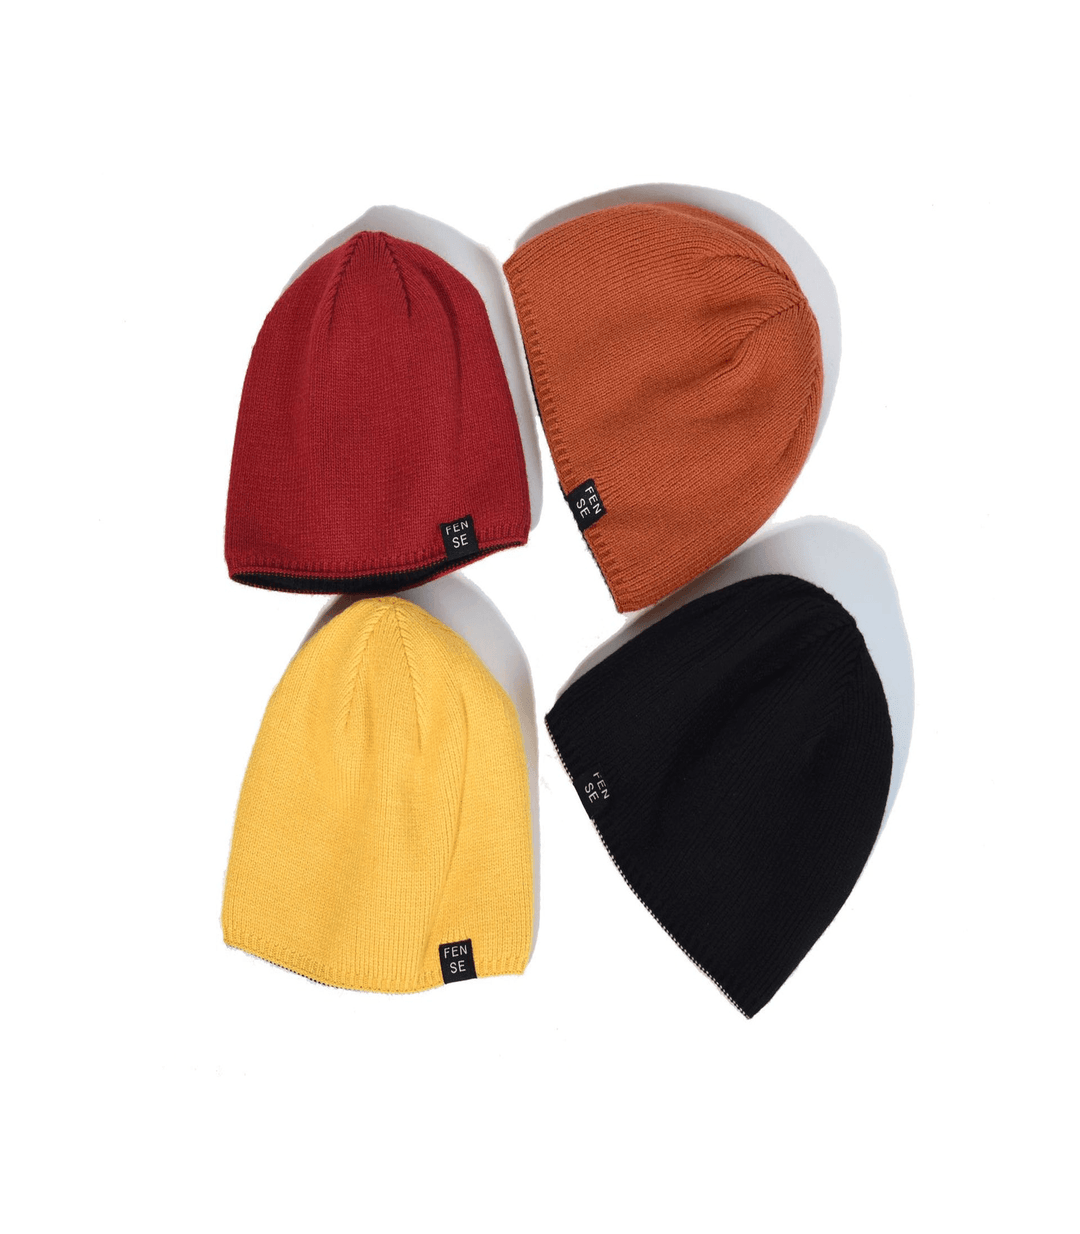 Knitted Woolen Hats for Men and Women Wear All-Match on Both Sides - MRSLM